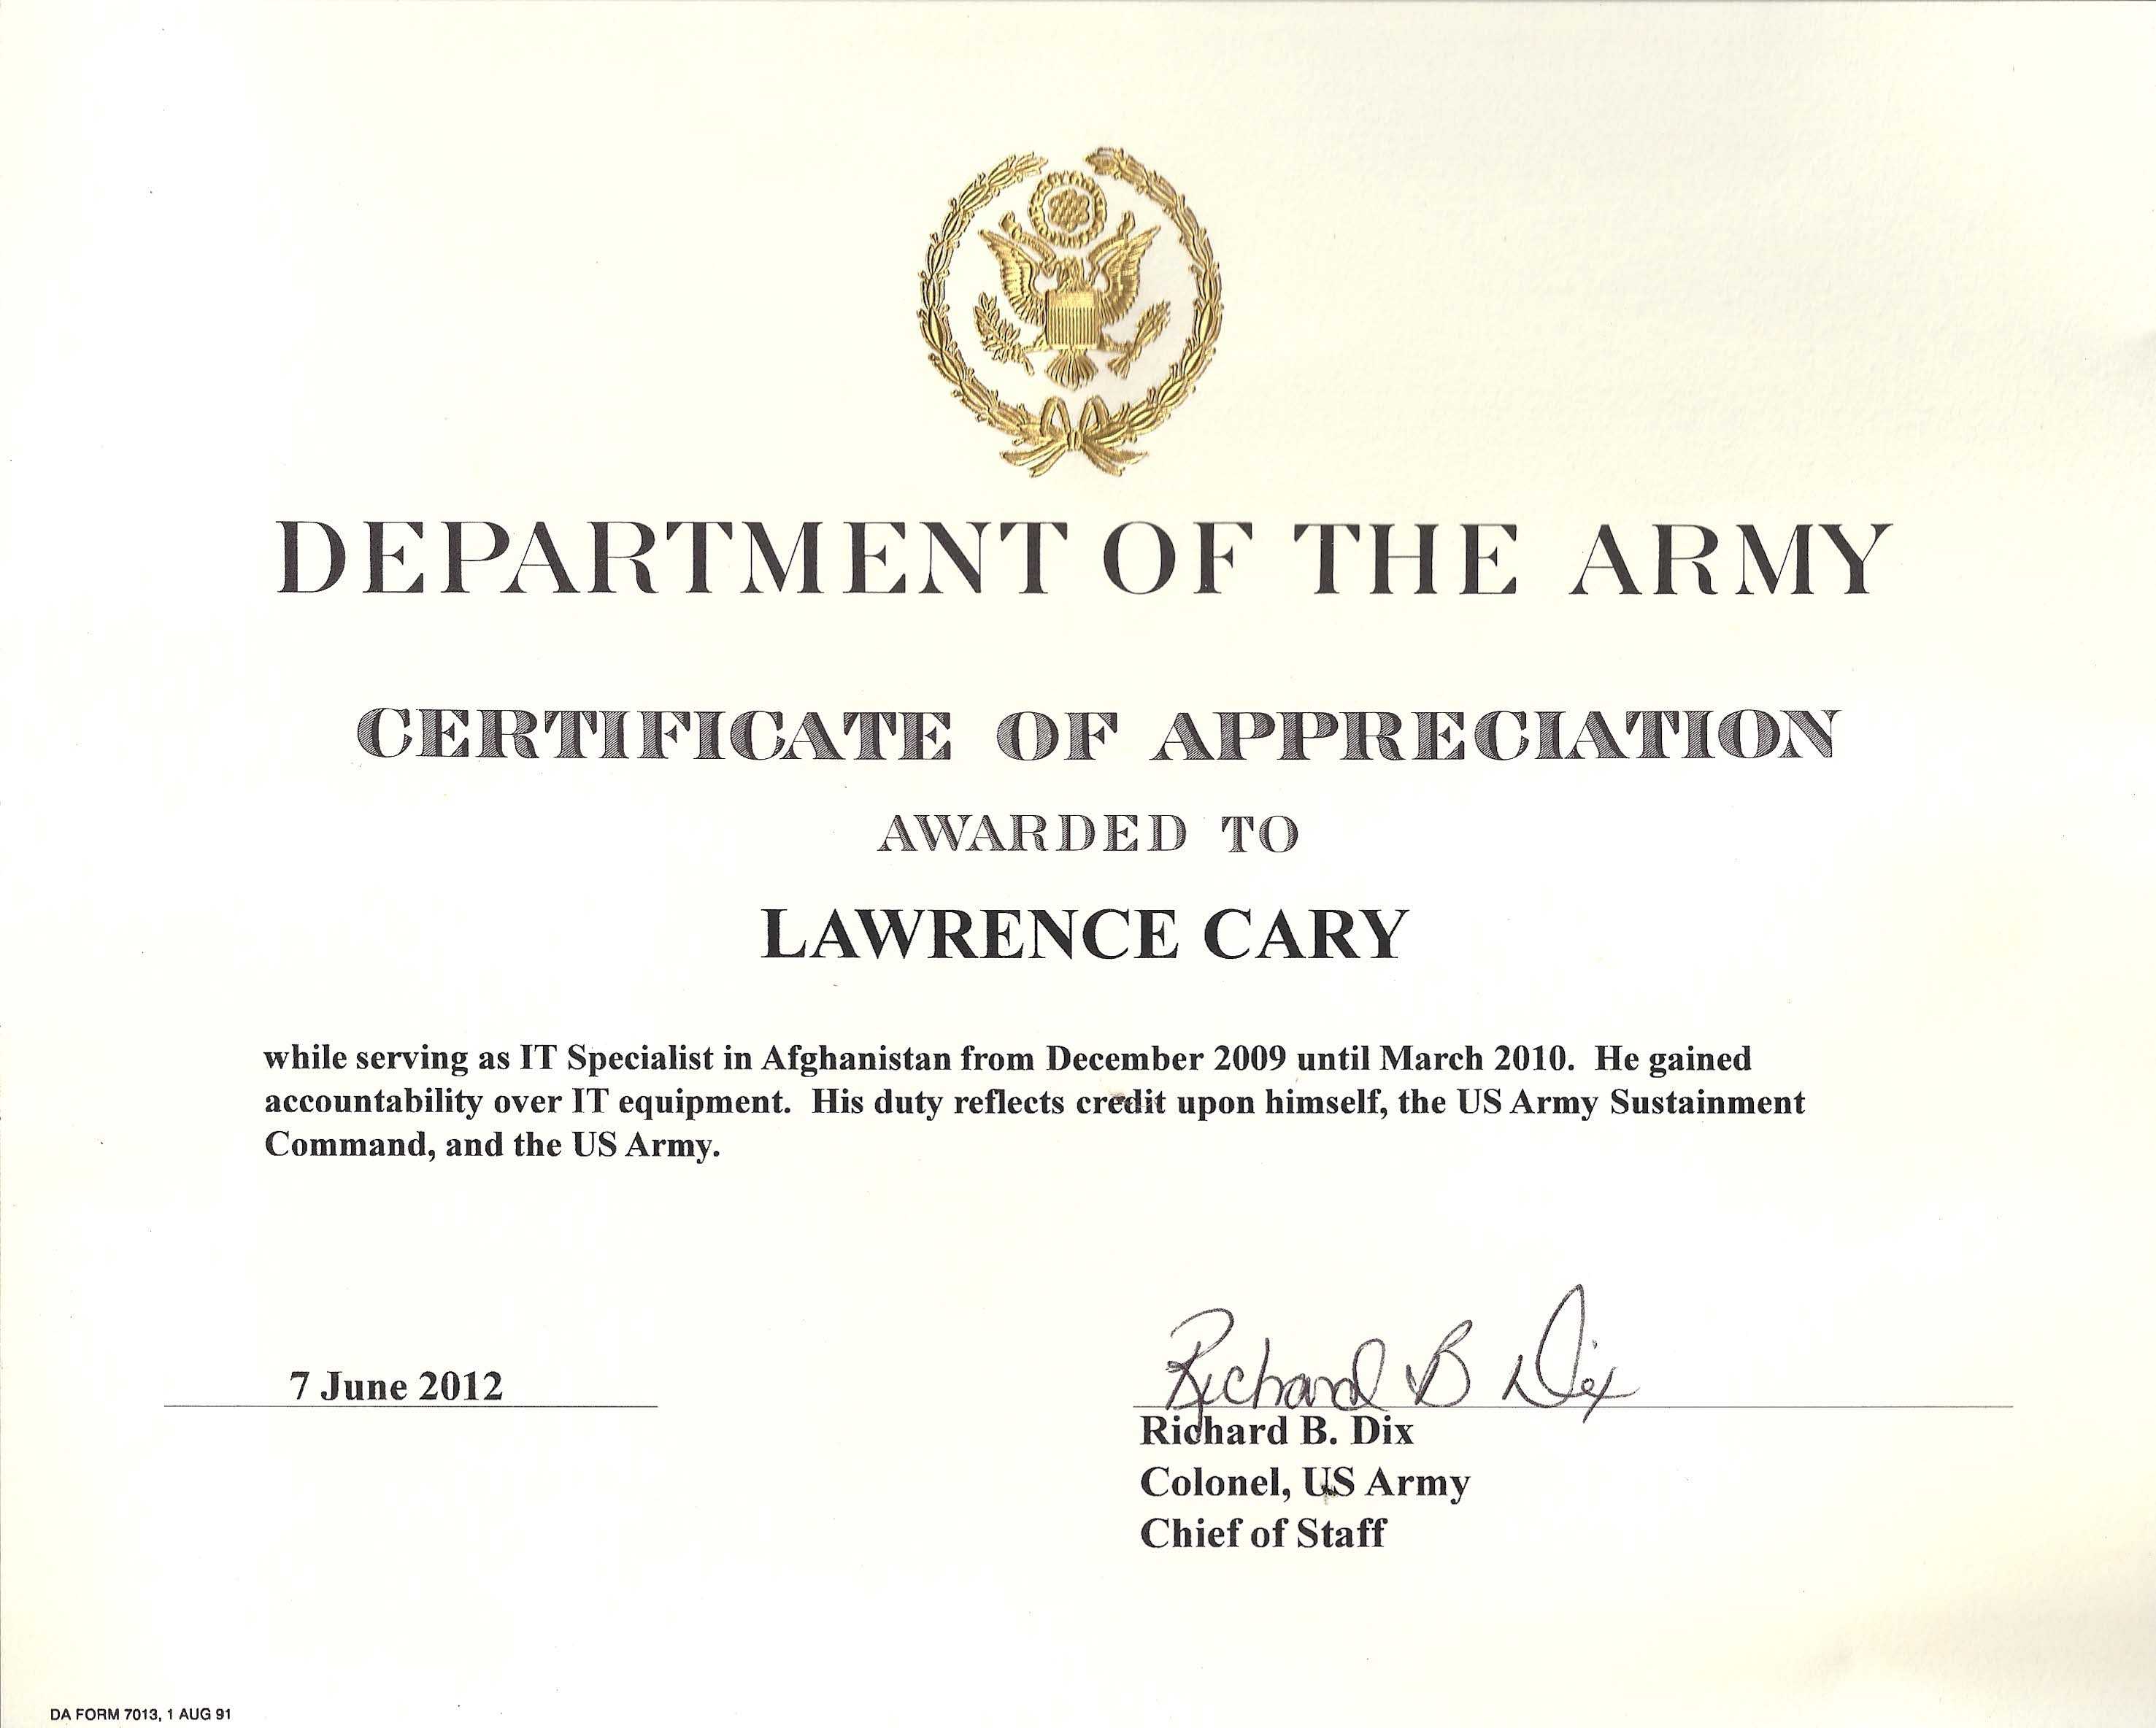 Army Certificate Of Completion Template - Atlantaauctionco With Regard To Army Certificate Of Completion Template